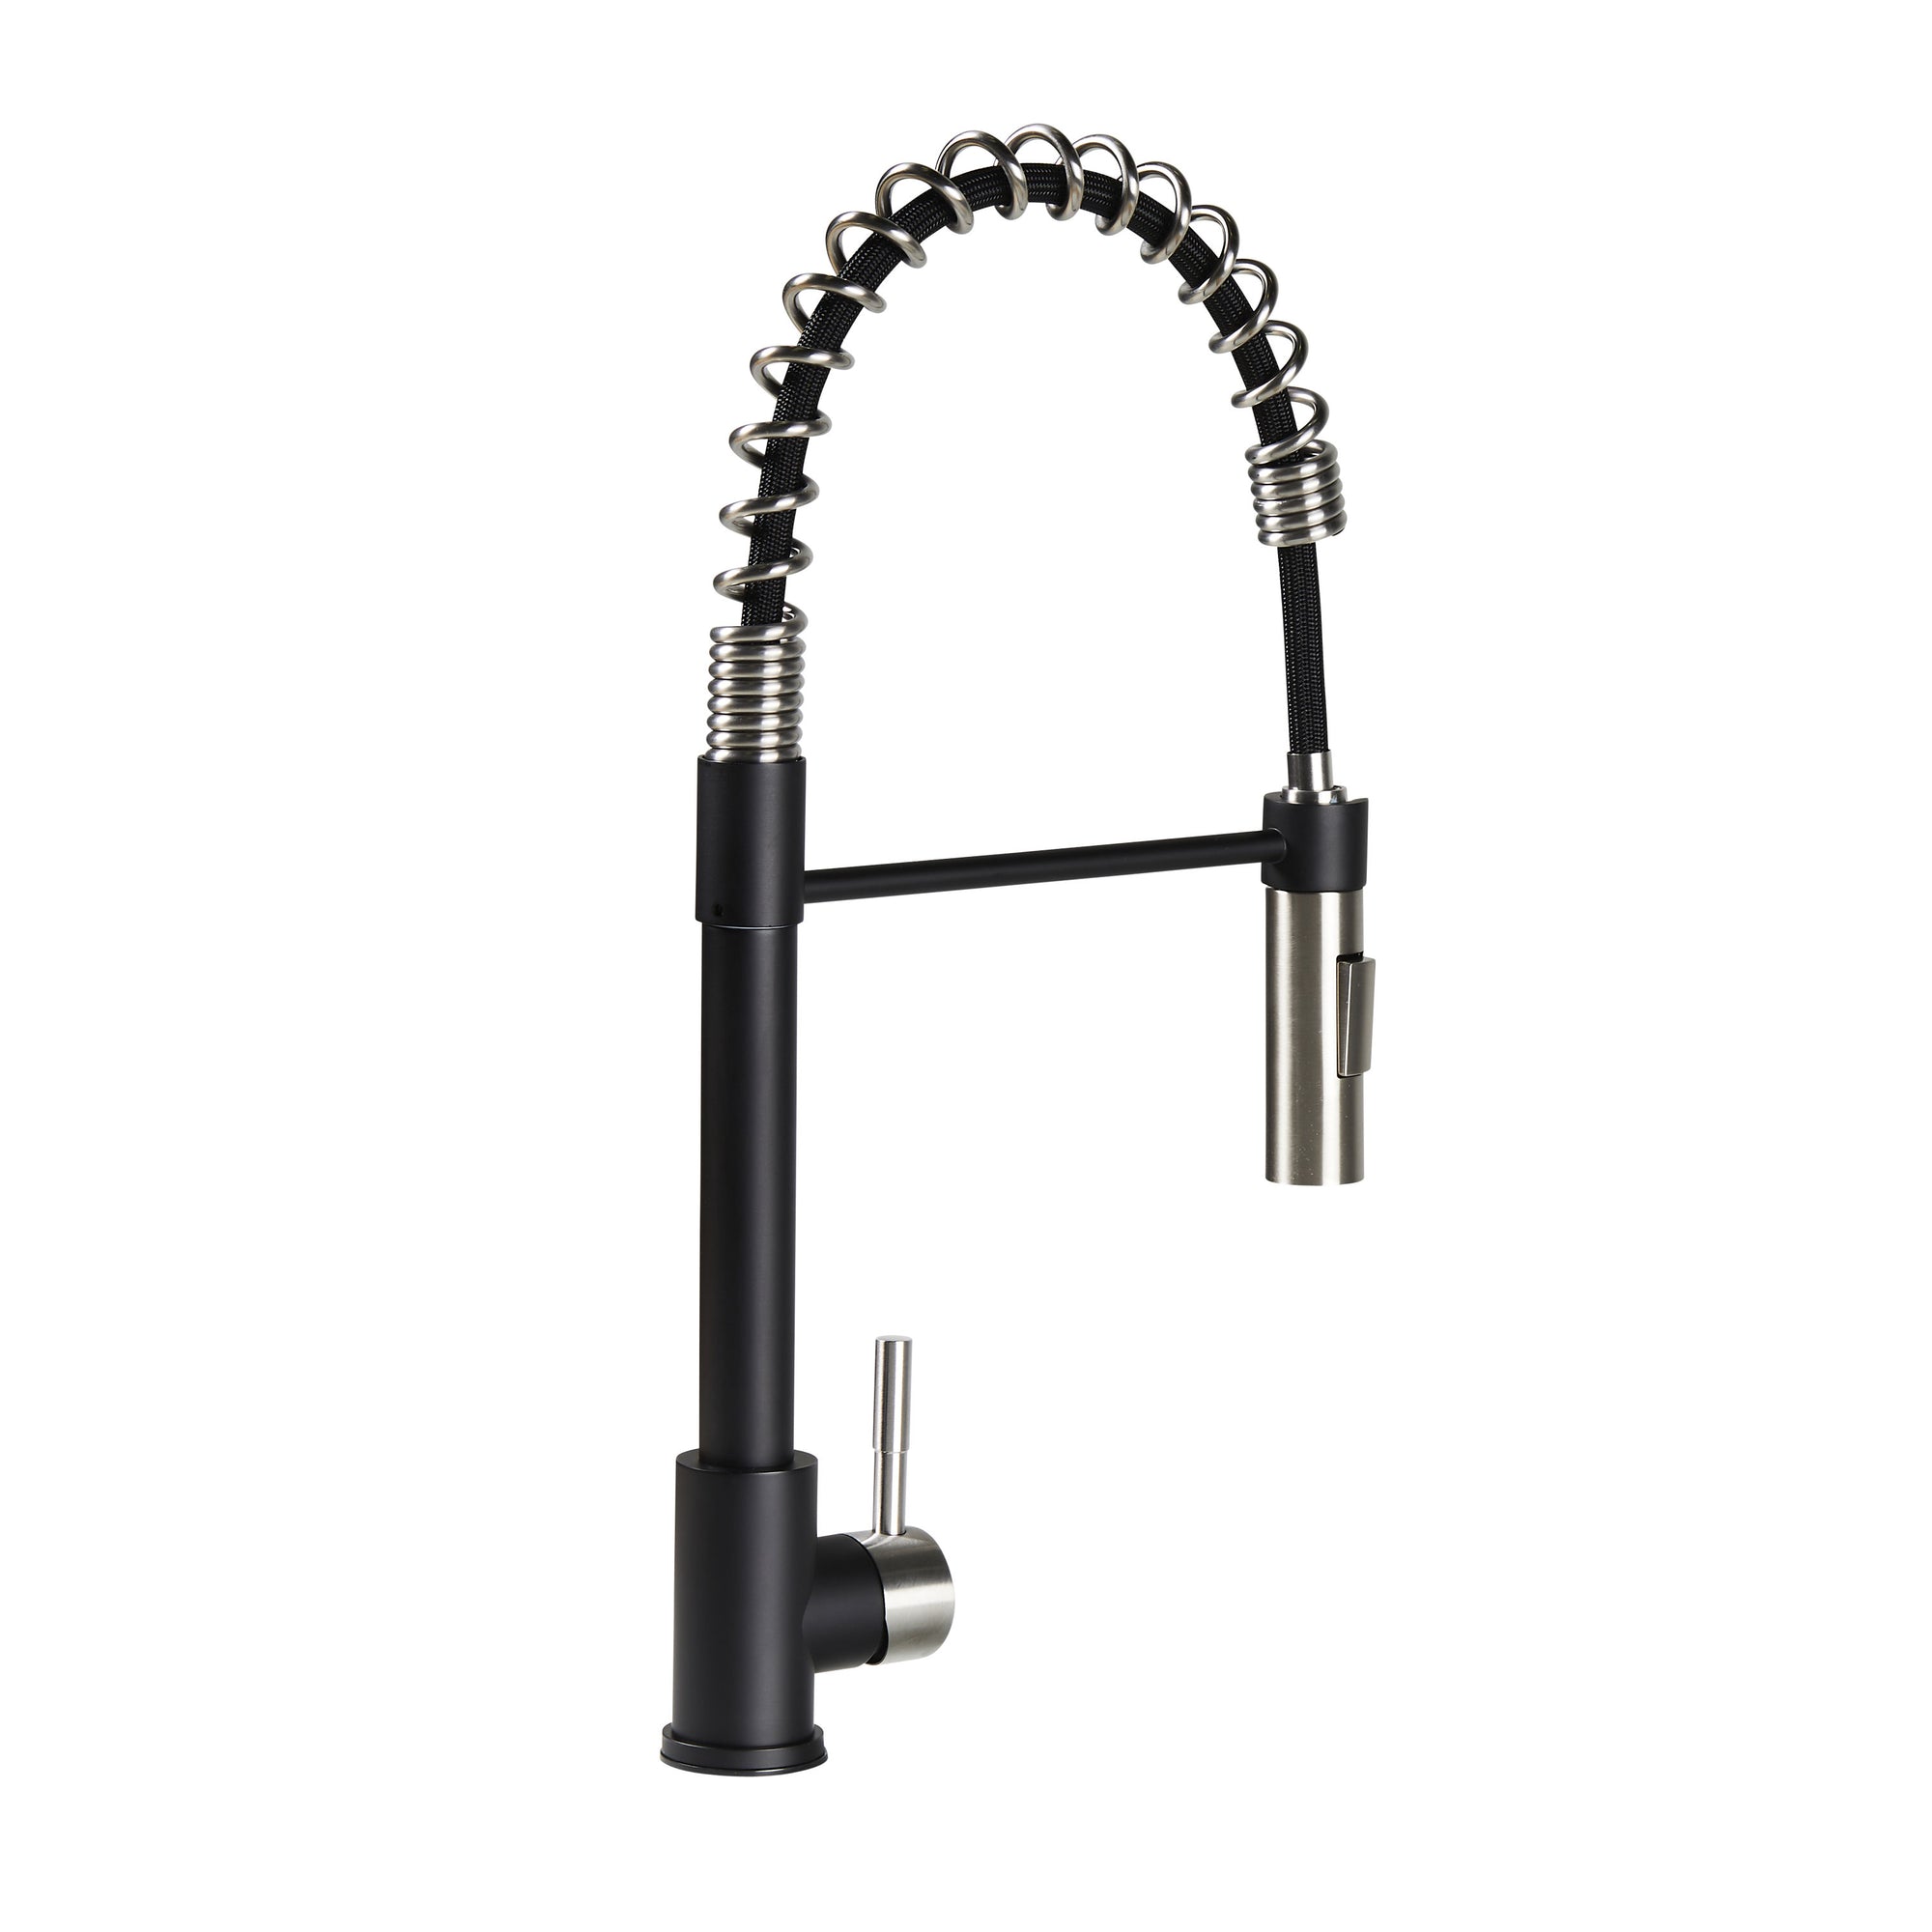 Lippert 2022109922 Flow Max Coiled Pull-Down Kitchen Faucet - Black/Stainless Steel